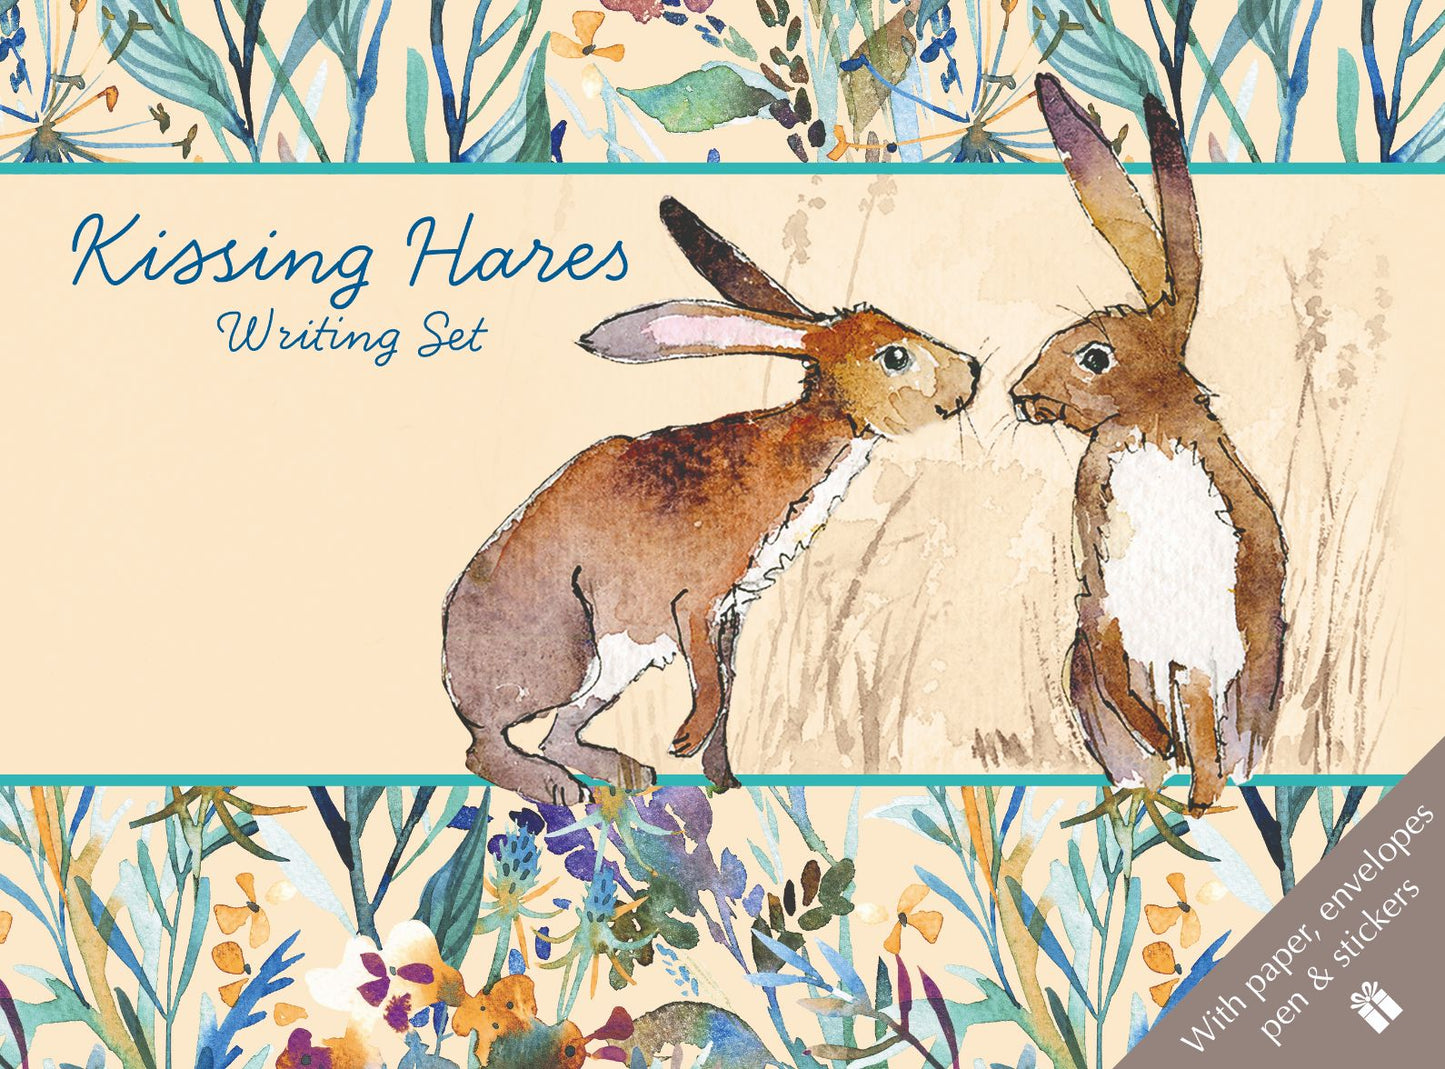 Gifted Stationery Kissing Hares Letter Writing Set Contains Pen, Paper & Envelopes